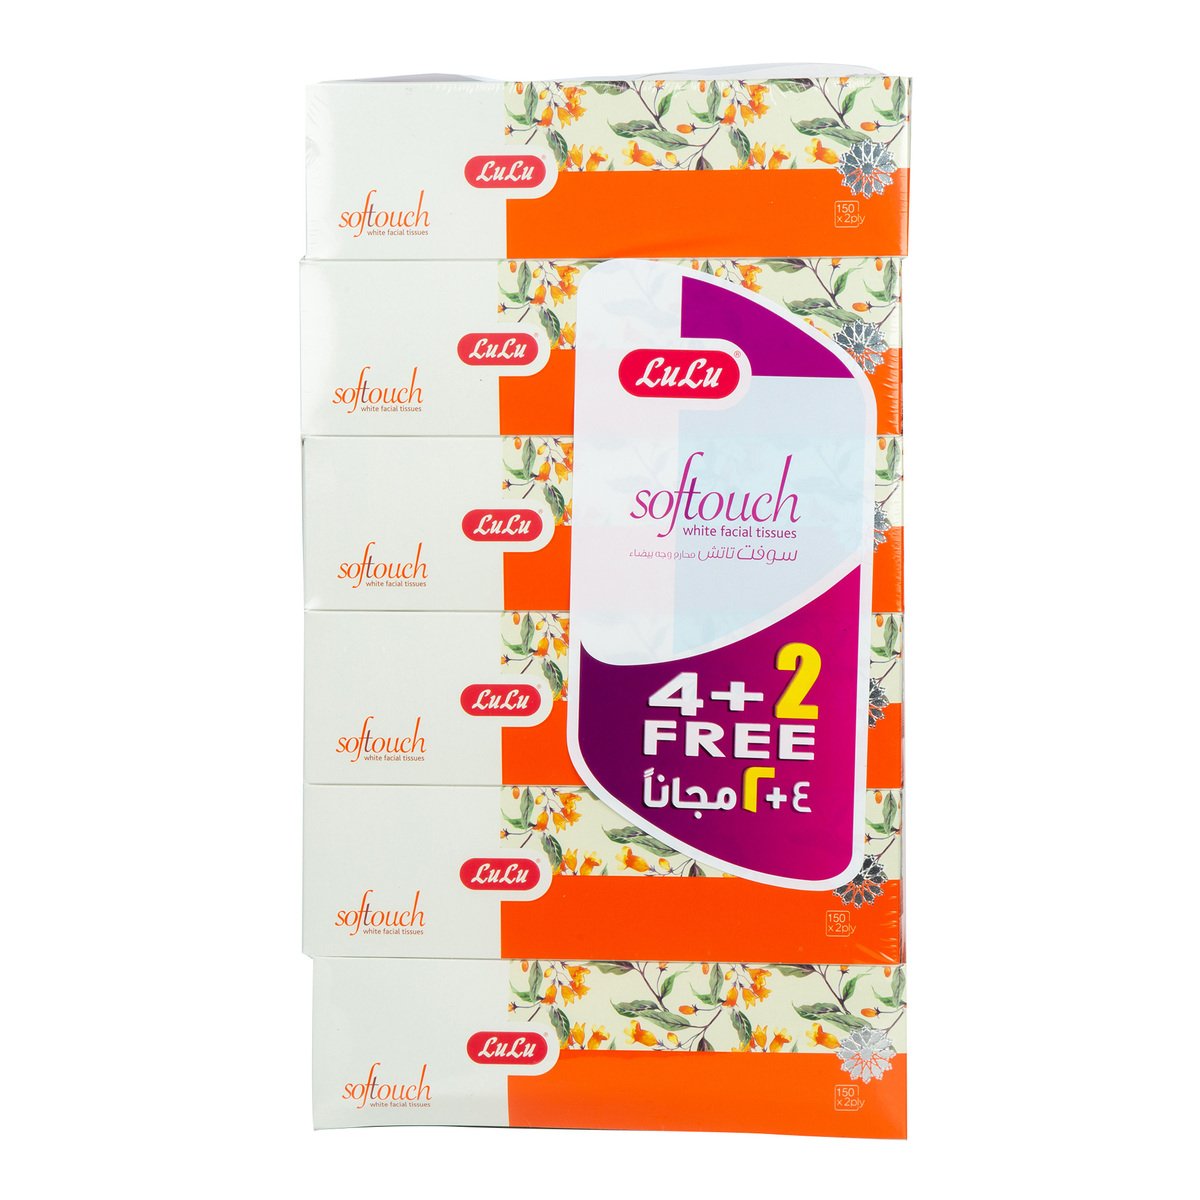 LuLu White Facial Tissue Rose 2ply 150 Sheets 4+2